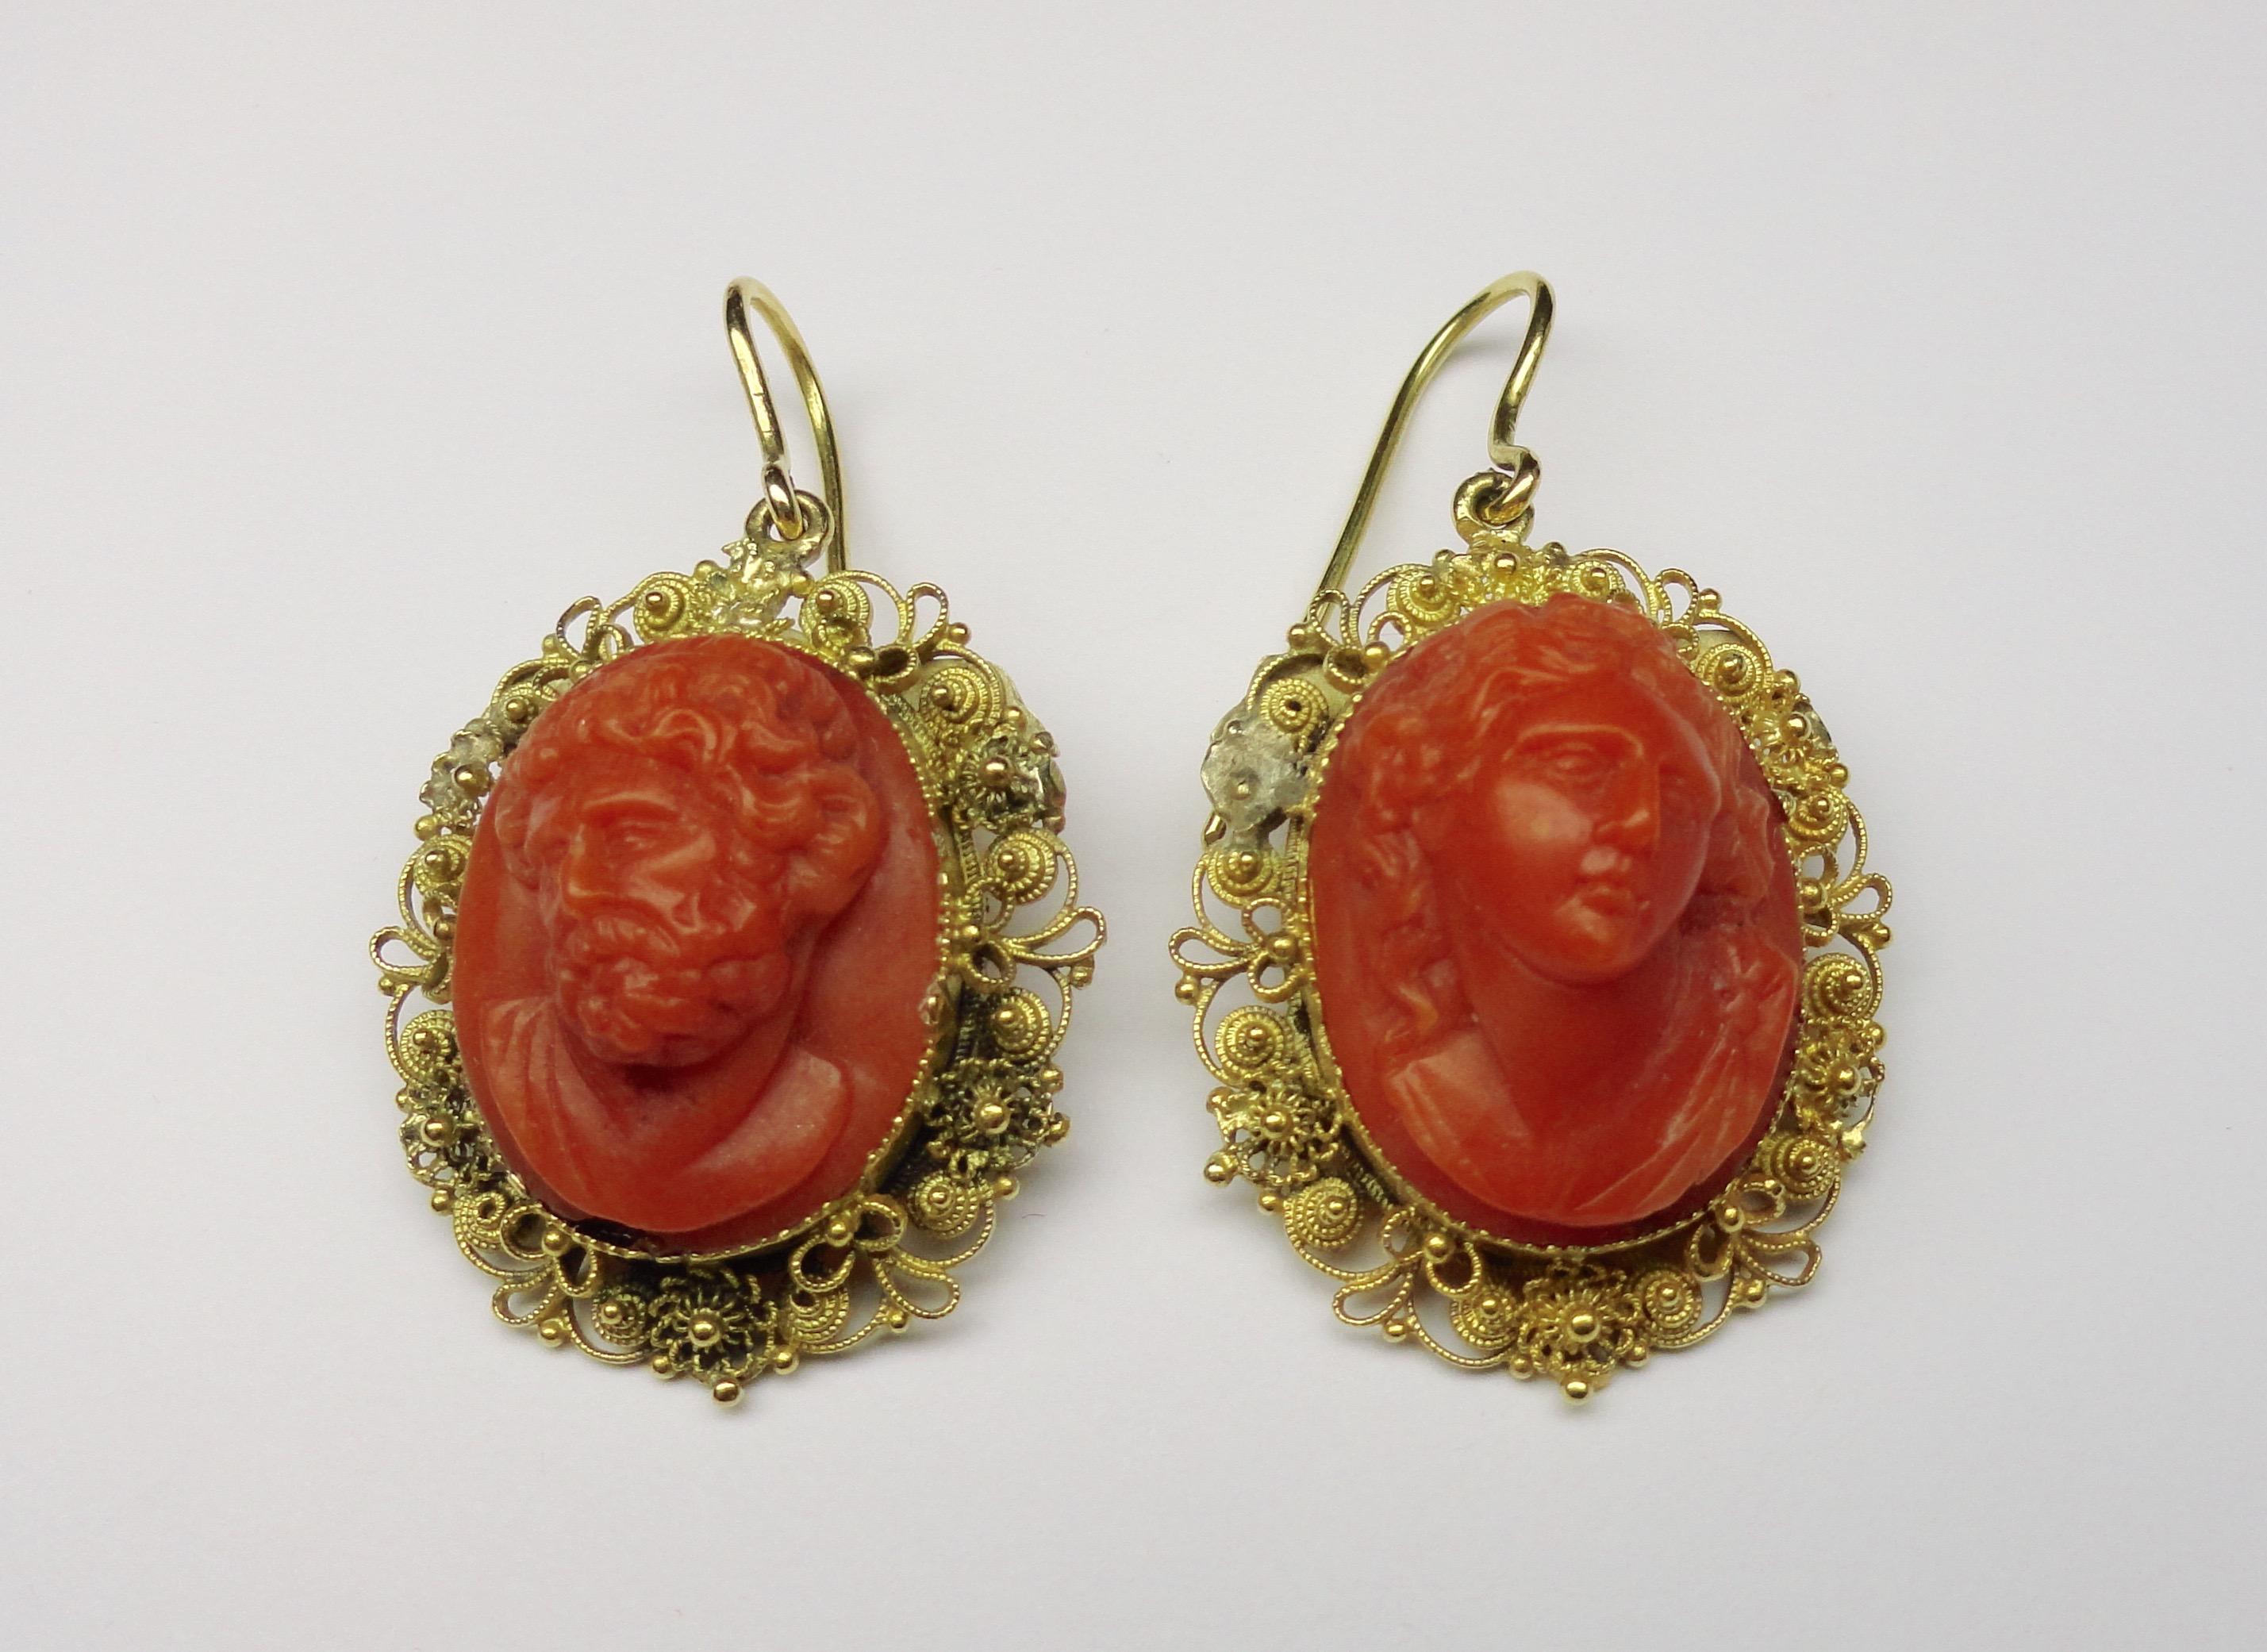 Antique earrings with coral cameos surrounded by gold filigree (18ct). With hinged hook fittings, Italian from the early 1900s.

Measurements: 4cm in length x 2.5cm in width